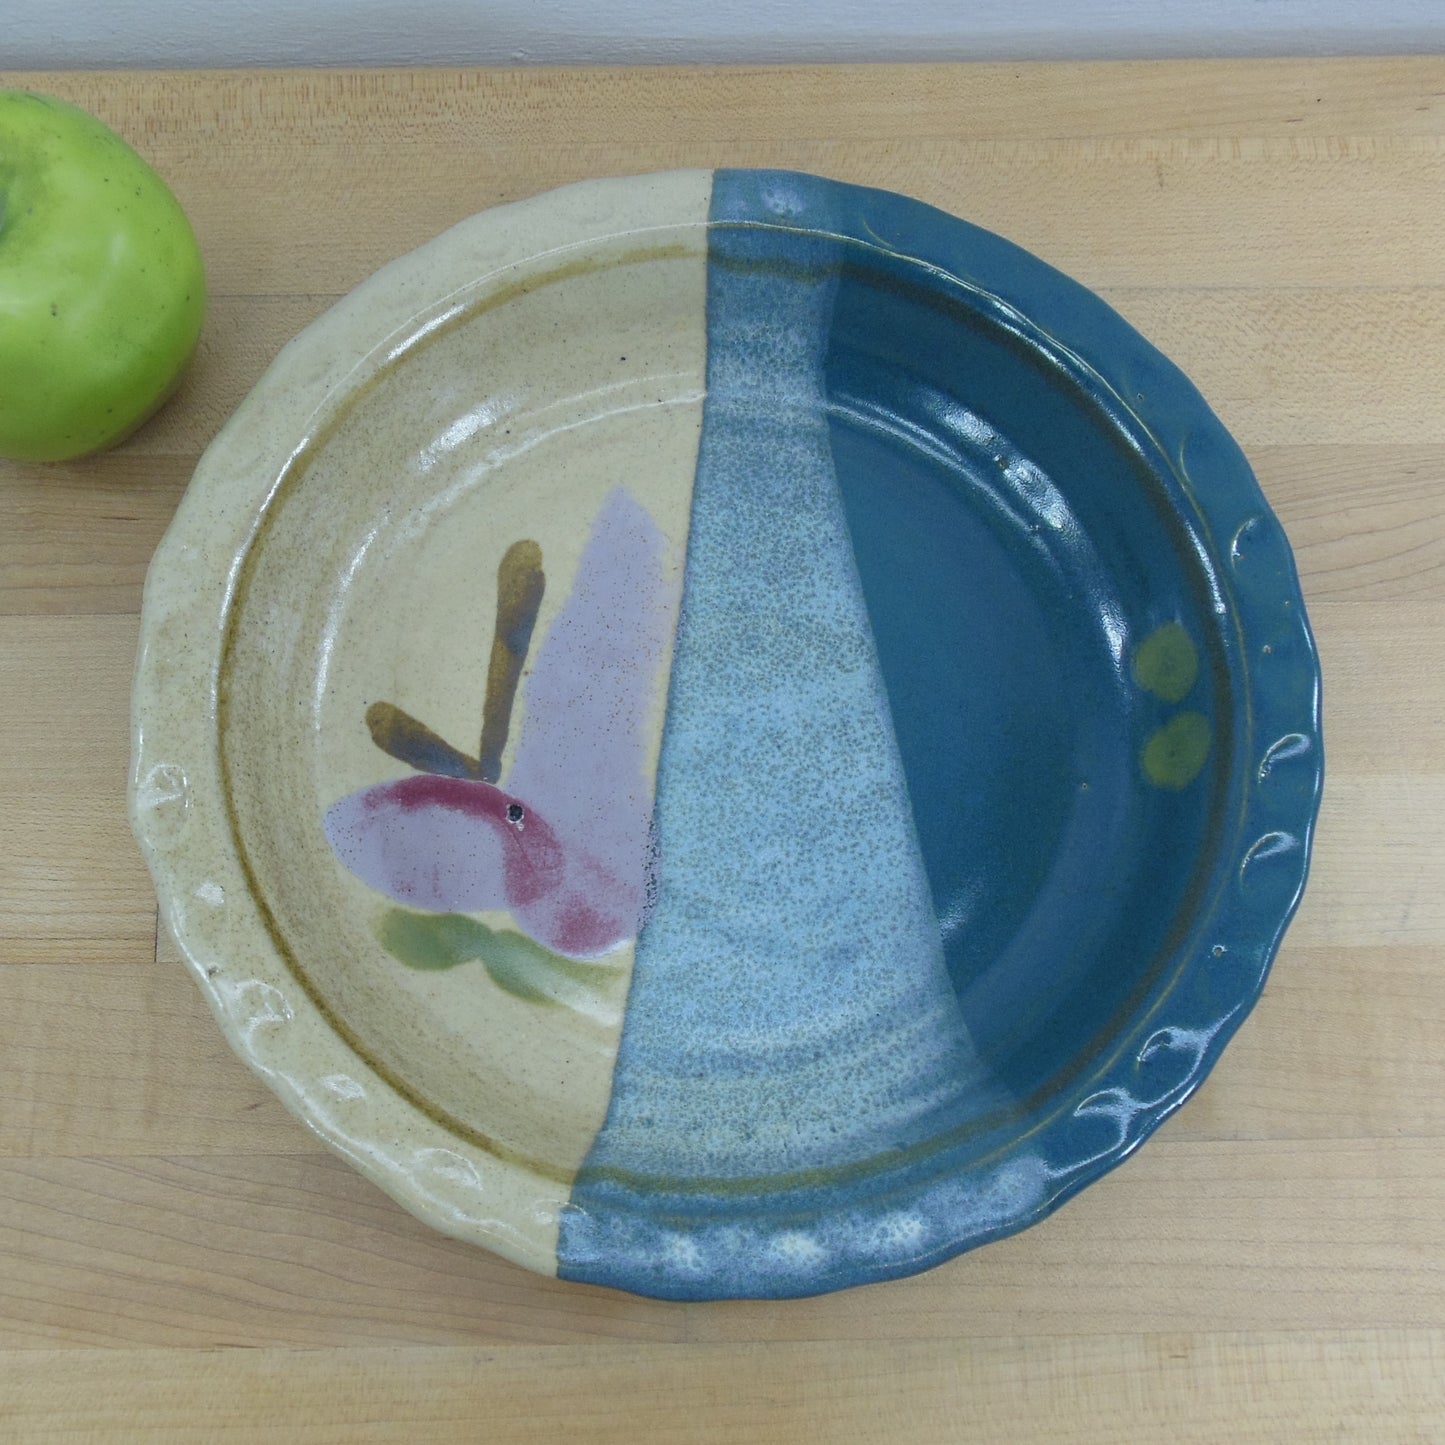 Stanfield Pottery Pie Plate Dish Turquoise Tan Pink